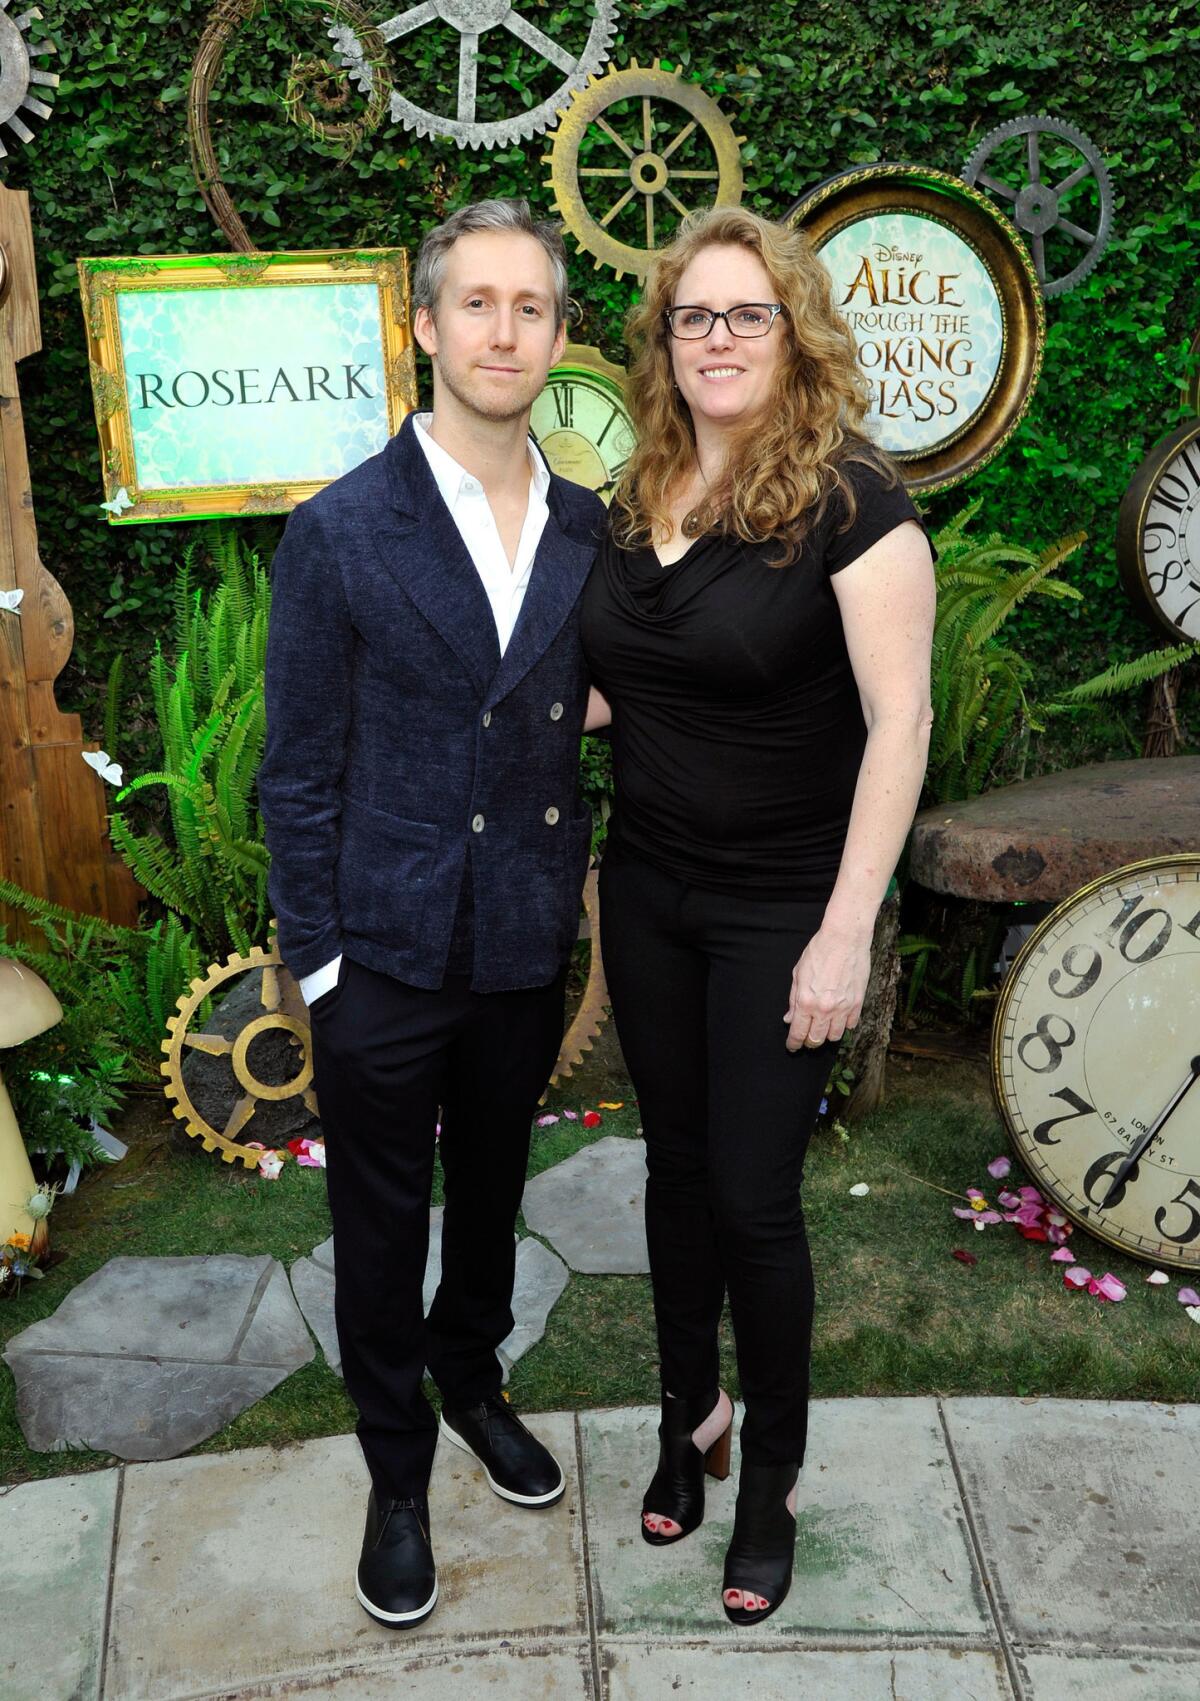 Adam Shulman and Heidi Nahser Fink, co-designers of James Banks Designs, attend a Disney event on May 12, 2016, at Roseark in West Hollywood.